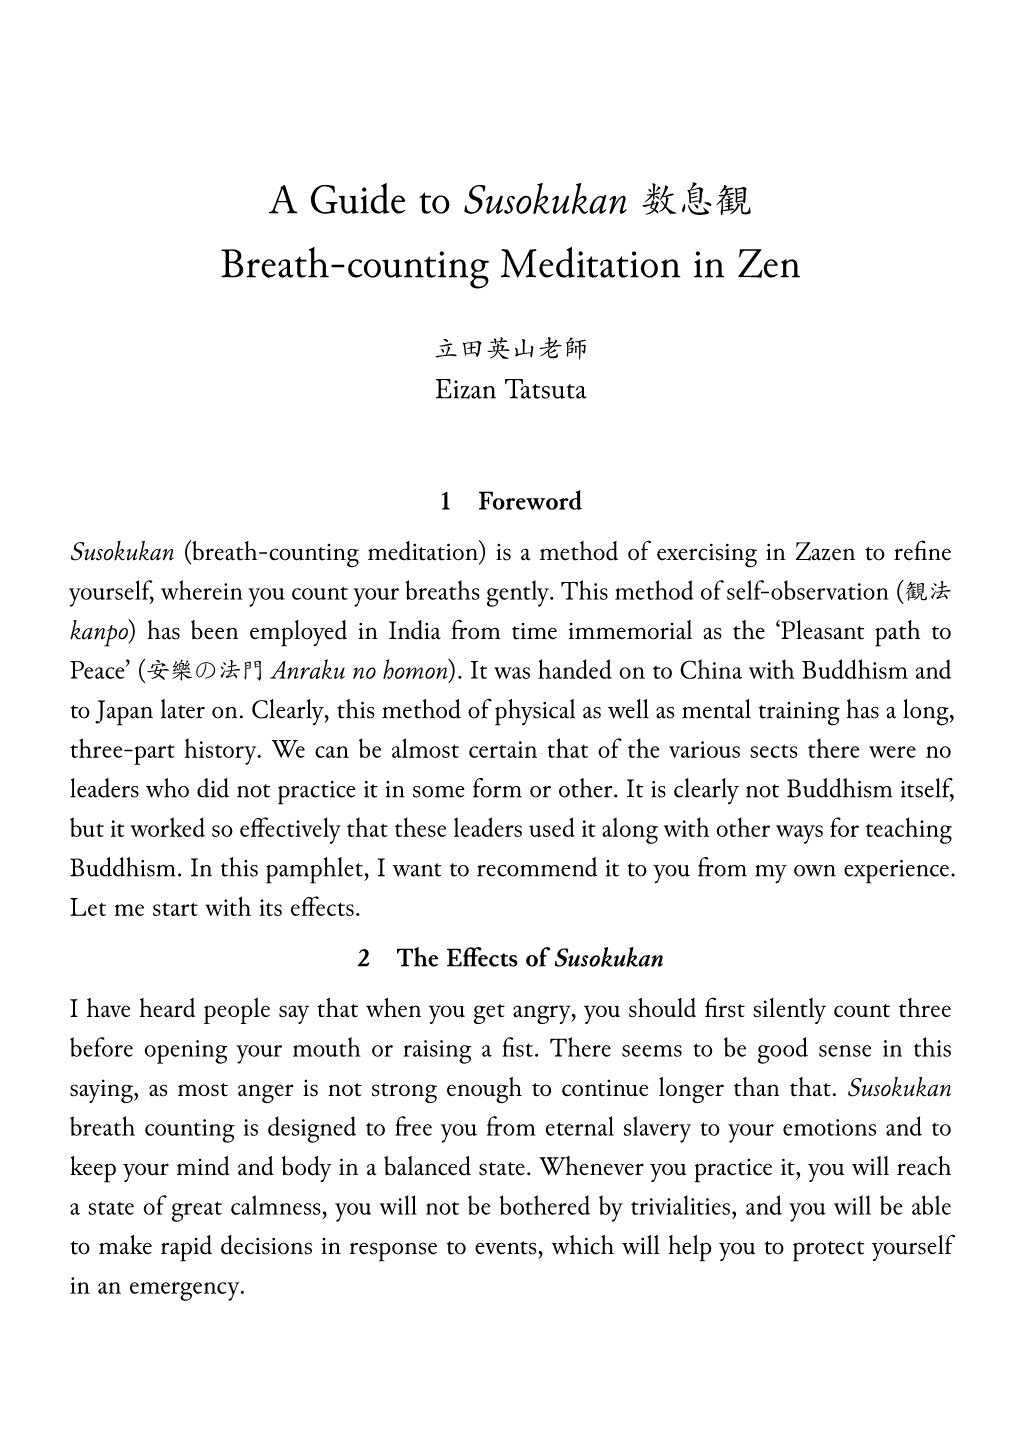 A Guide to Susokukan 数息観 Breath-Counting Meditation in Zen